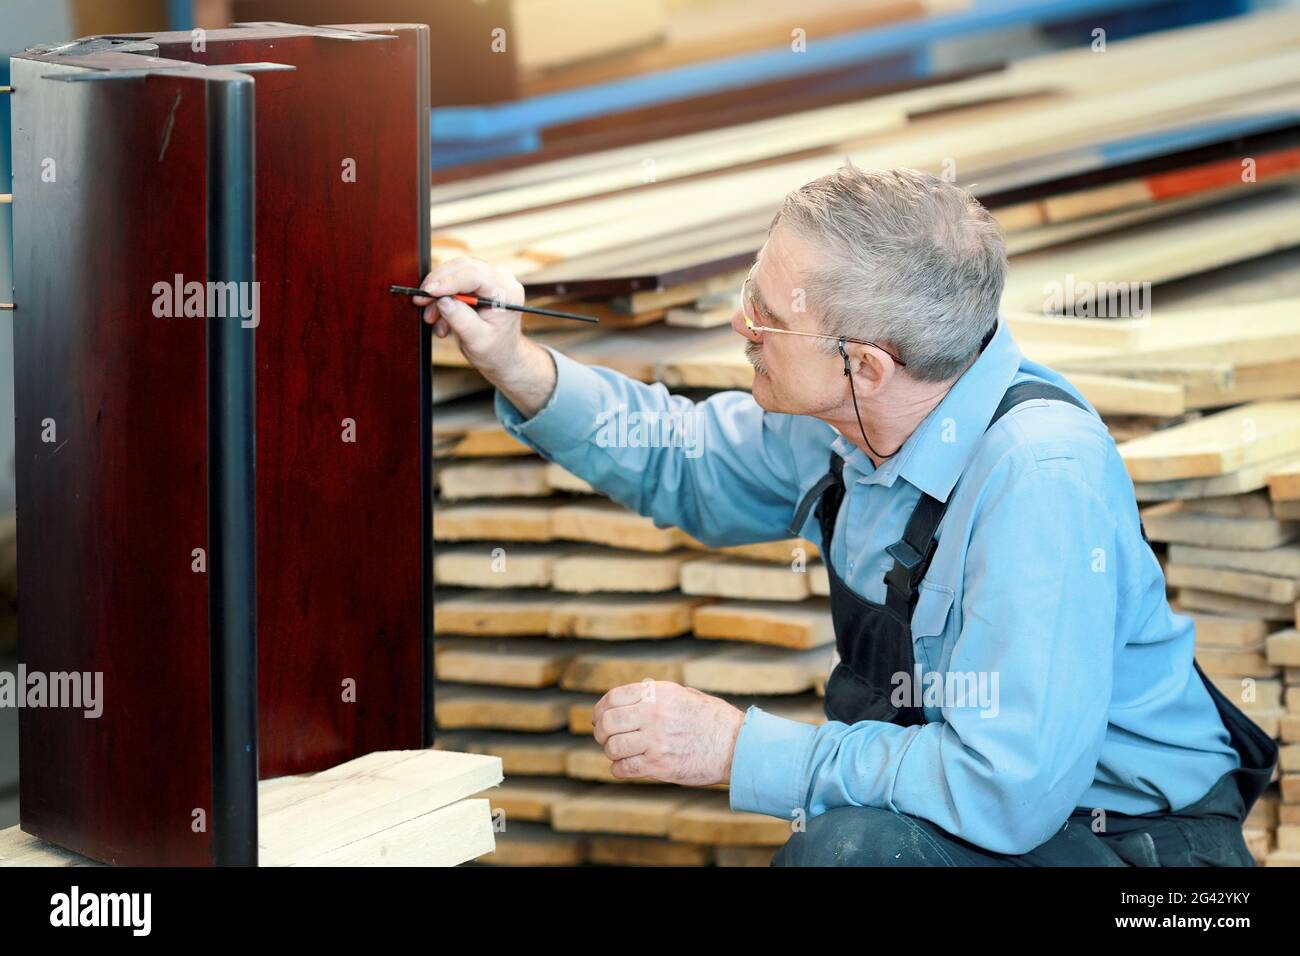 An elderly man with glasses and gray hair works with wood in a carpentry shop. Stock Photo